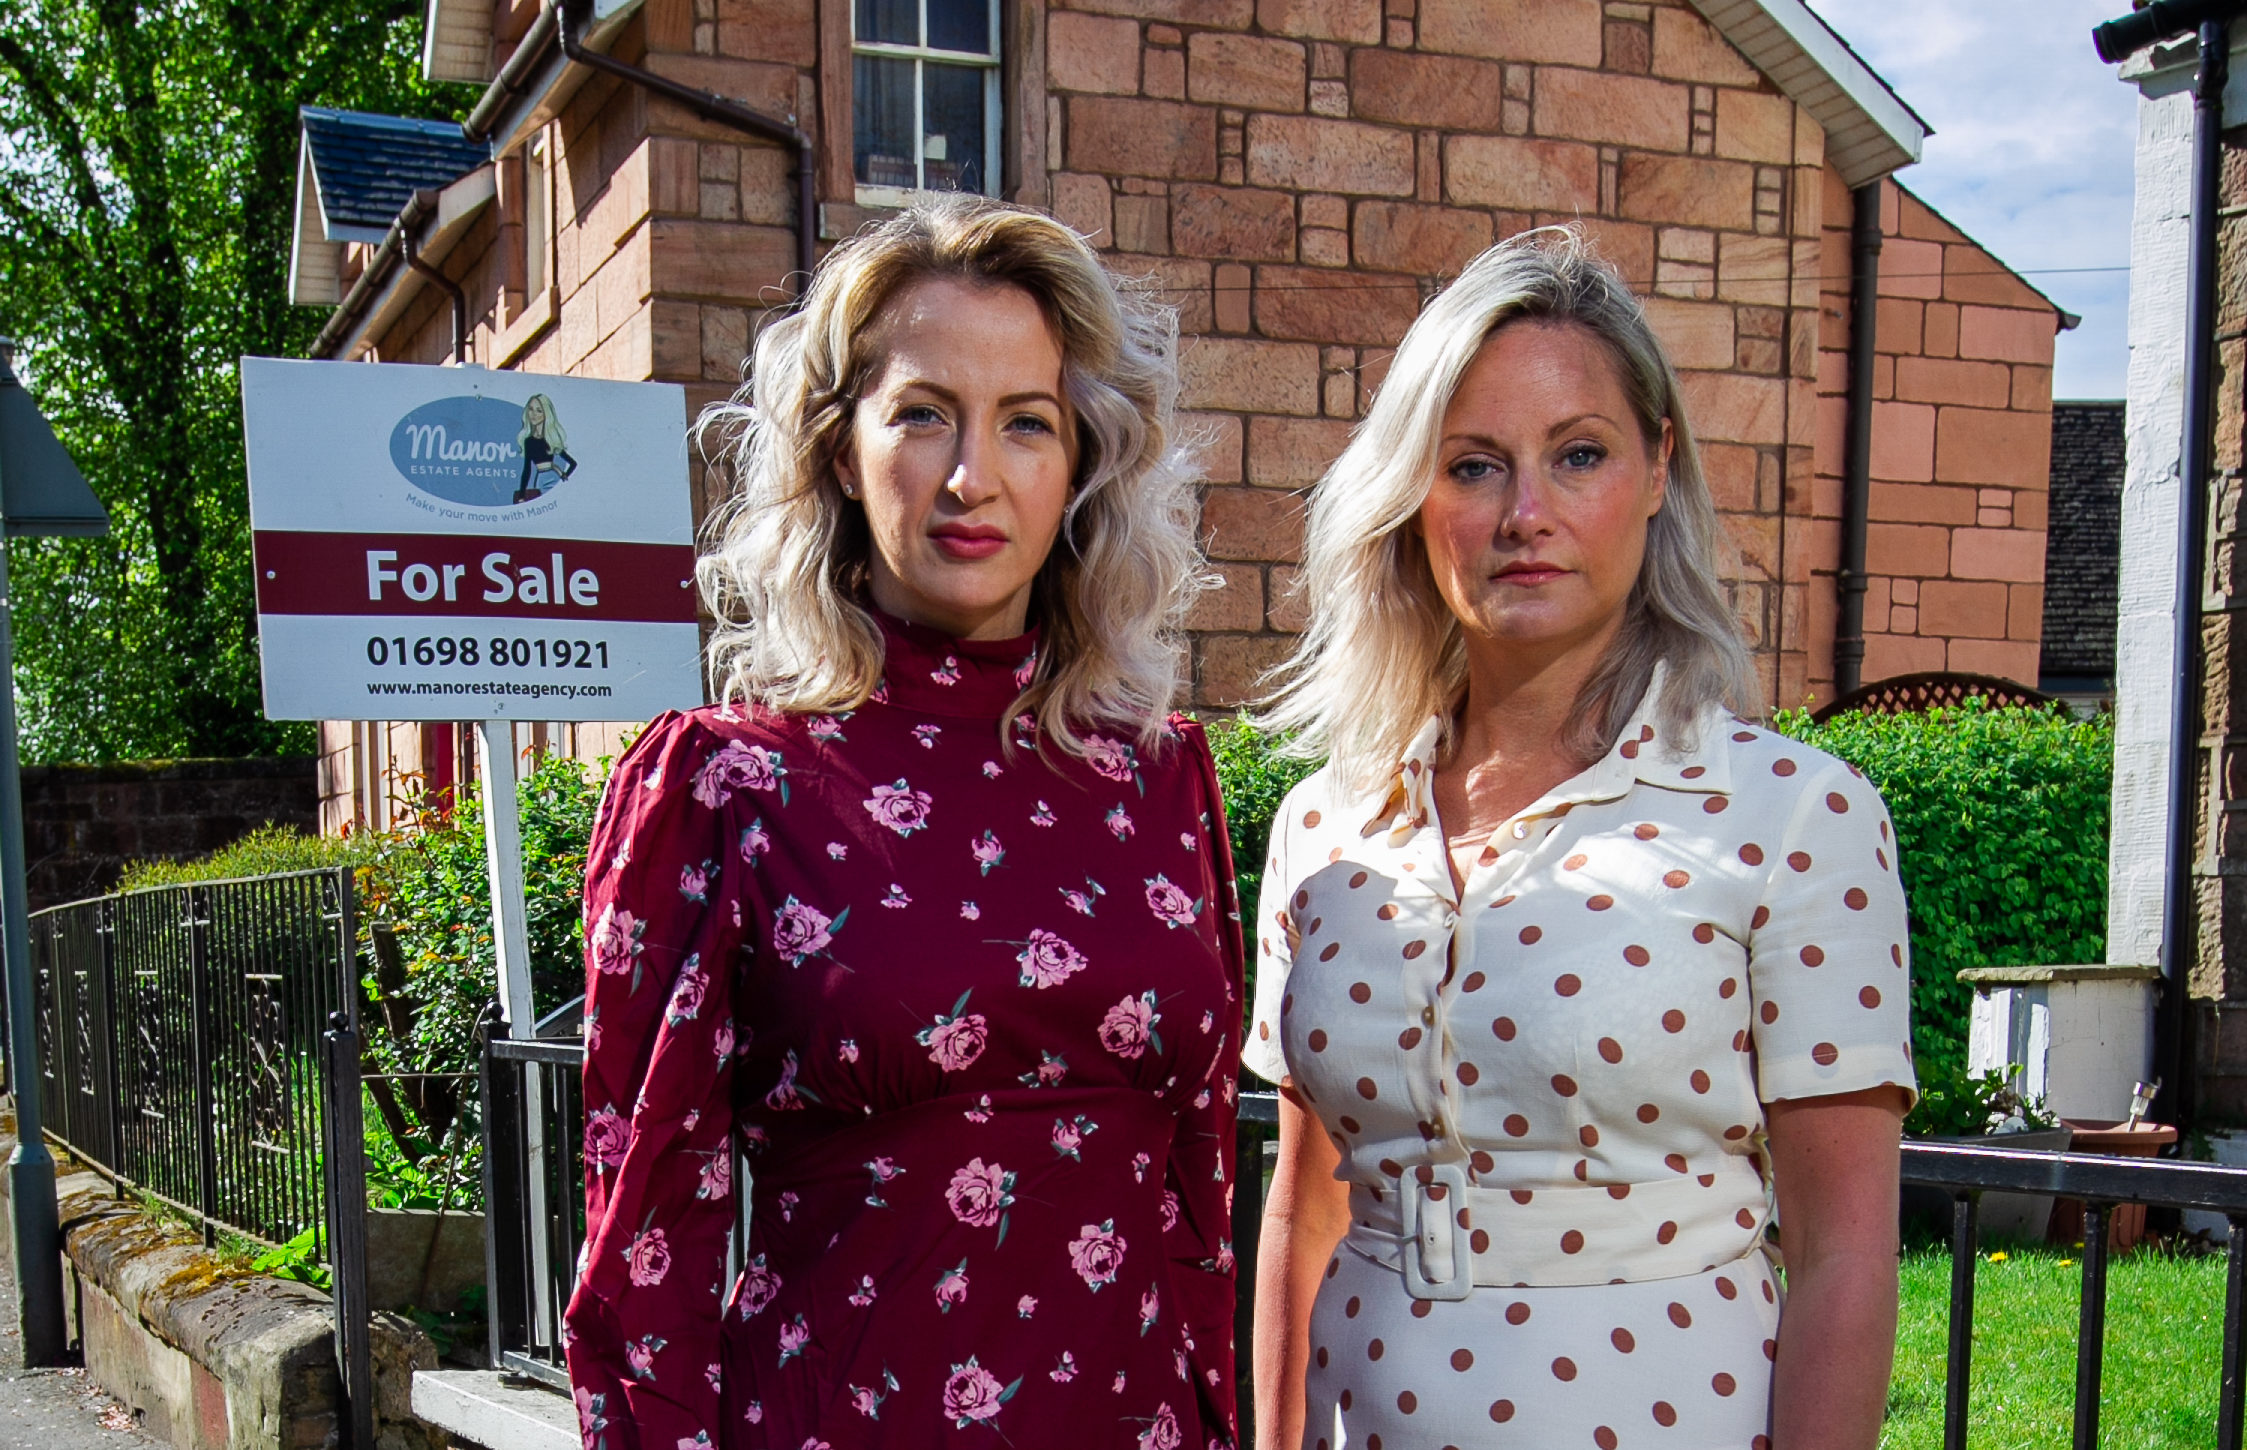 Claire Sarah Hart and Sandra Hill of Manor Estate Agents